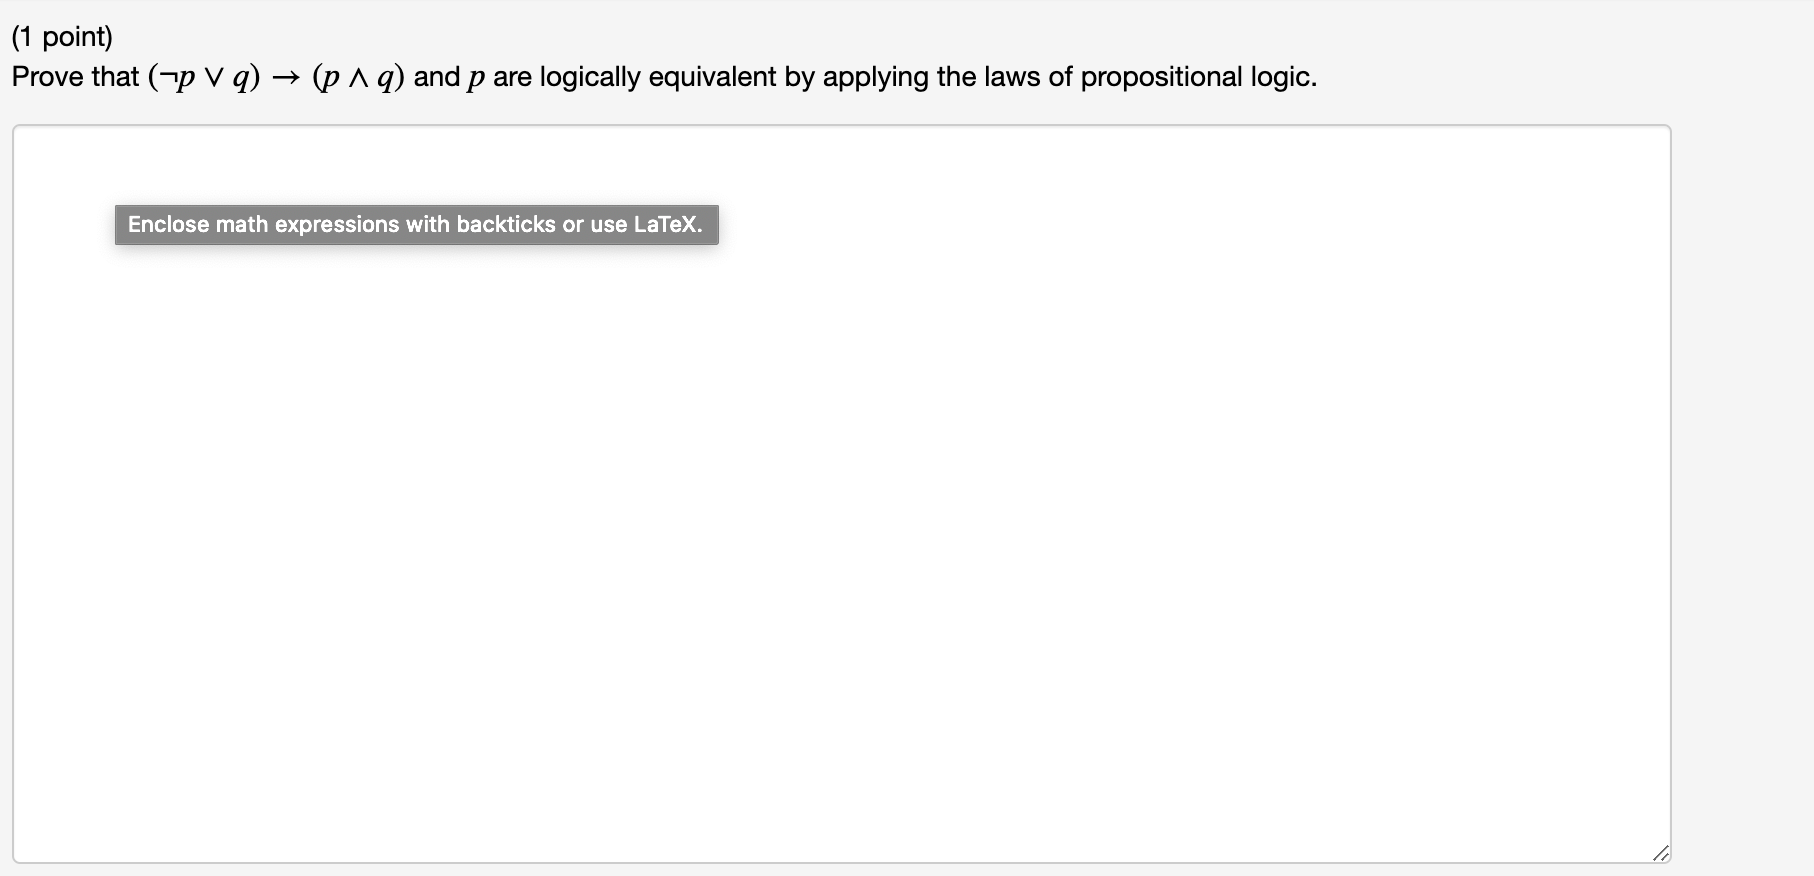 1 Point Prove That P Vq P19 And P Are Logically Equivalent By Applying The Laws Of Propositional Logic Enclose 1